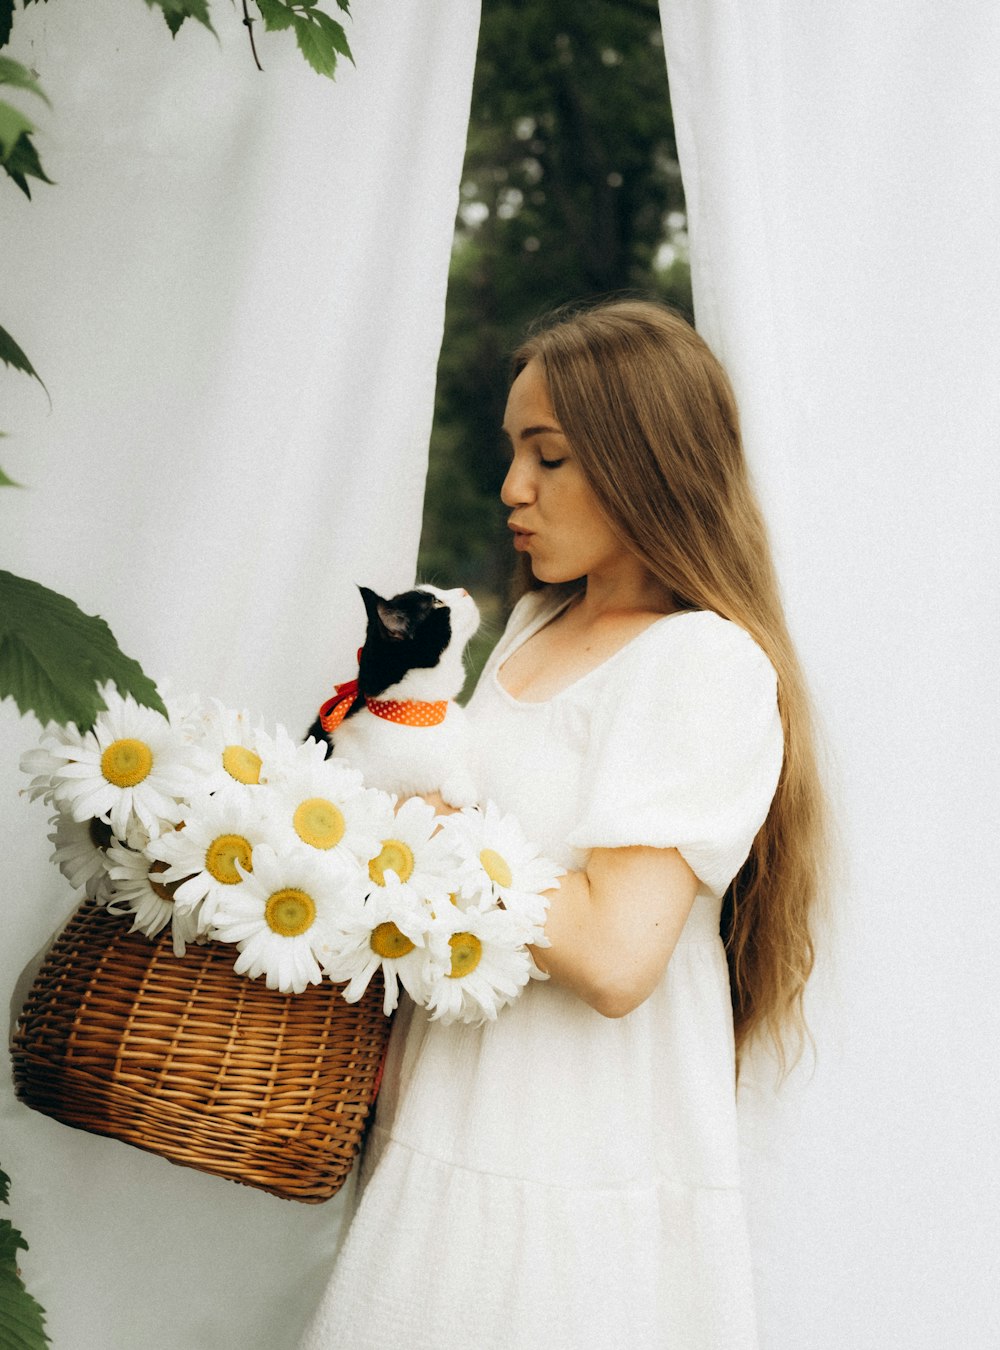 woman in white dress holding white daisy flowers